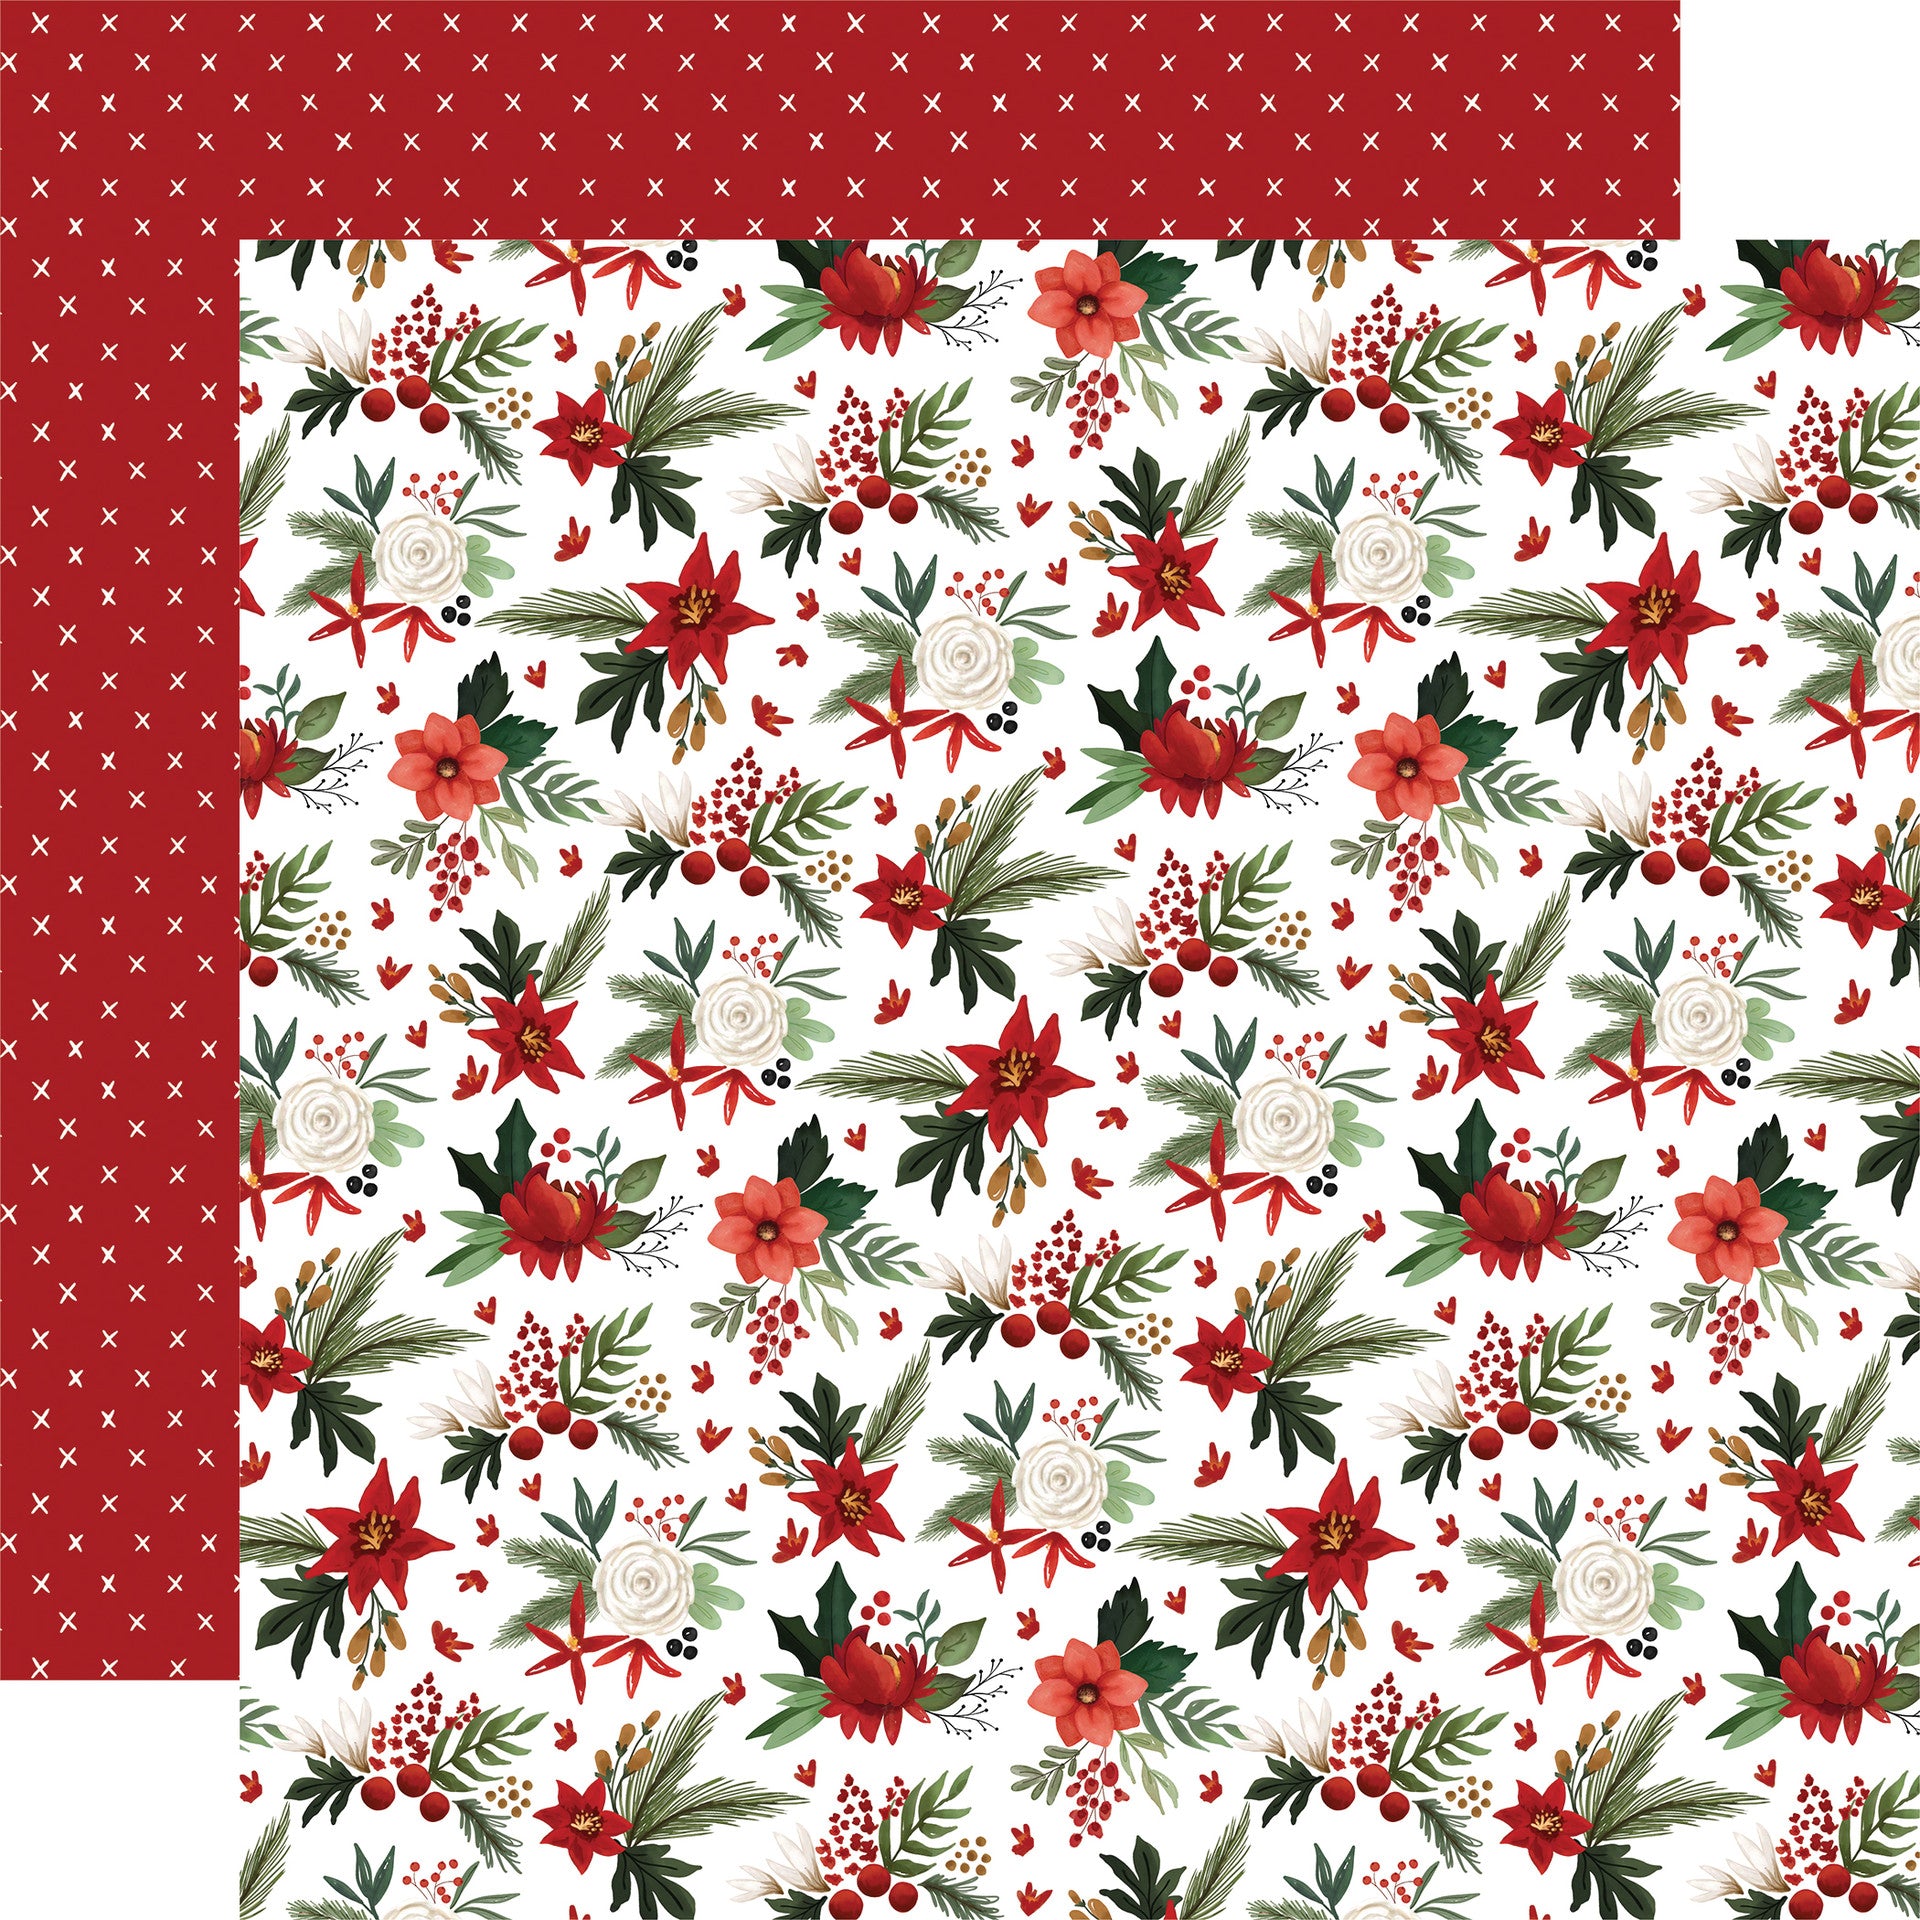 A Wonderful Christmas Deck the Halls Patterned Paper